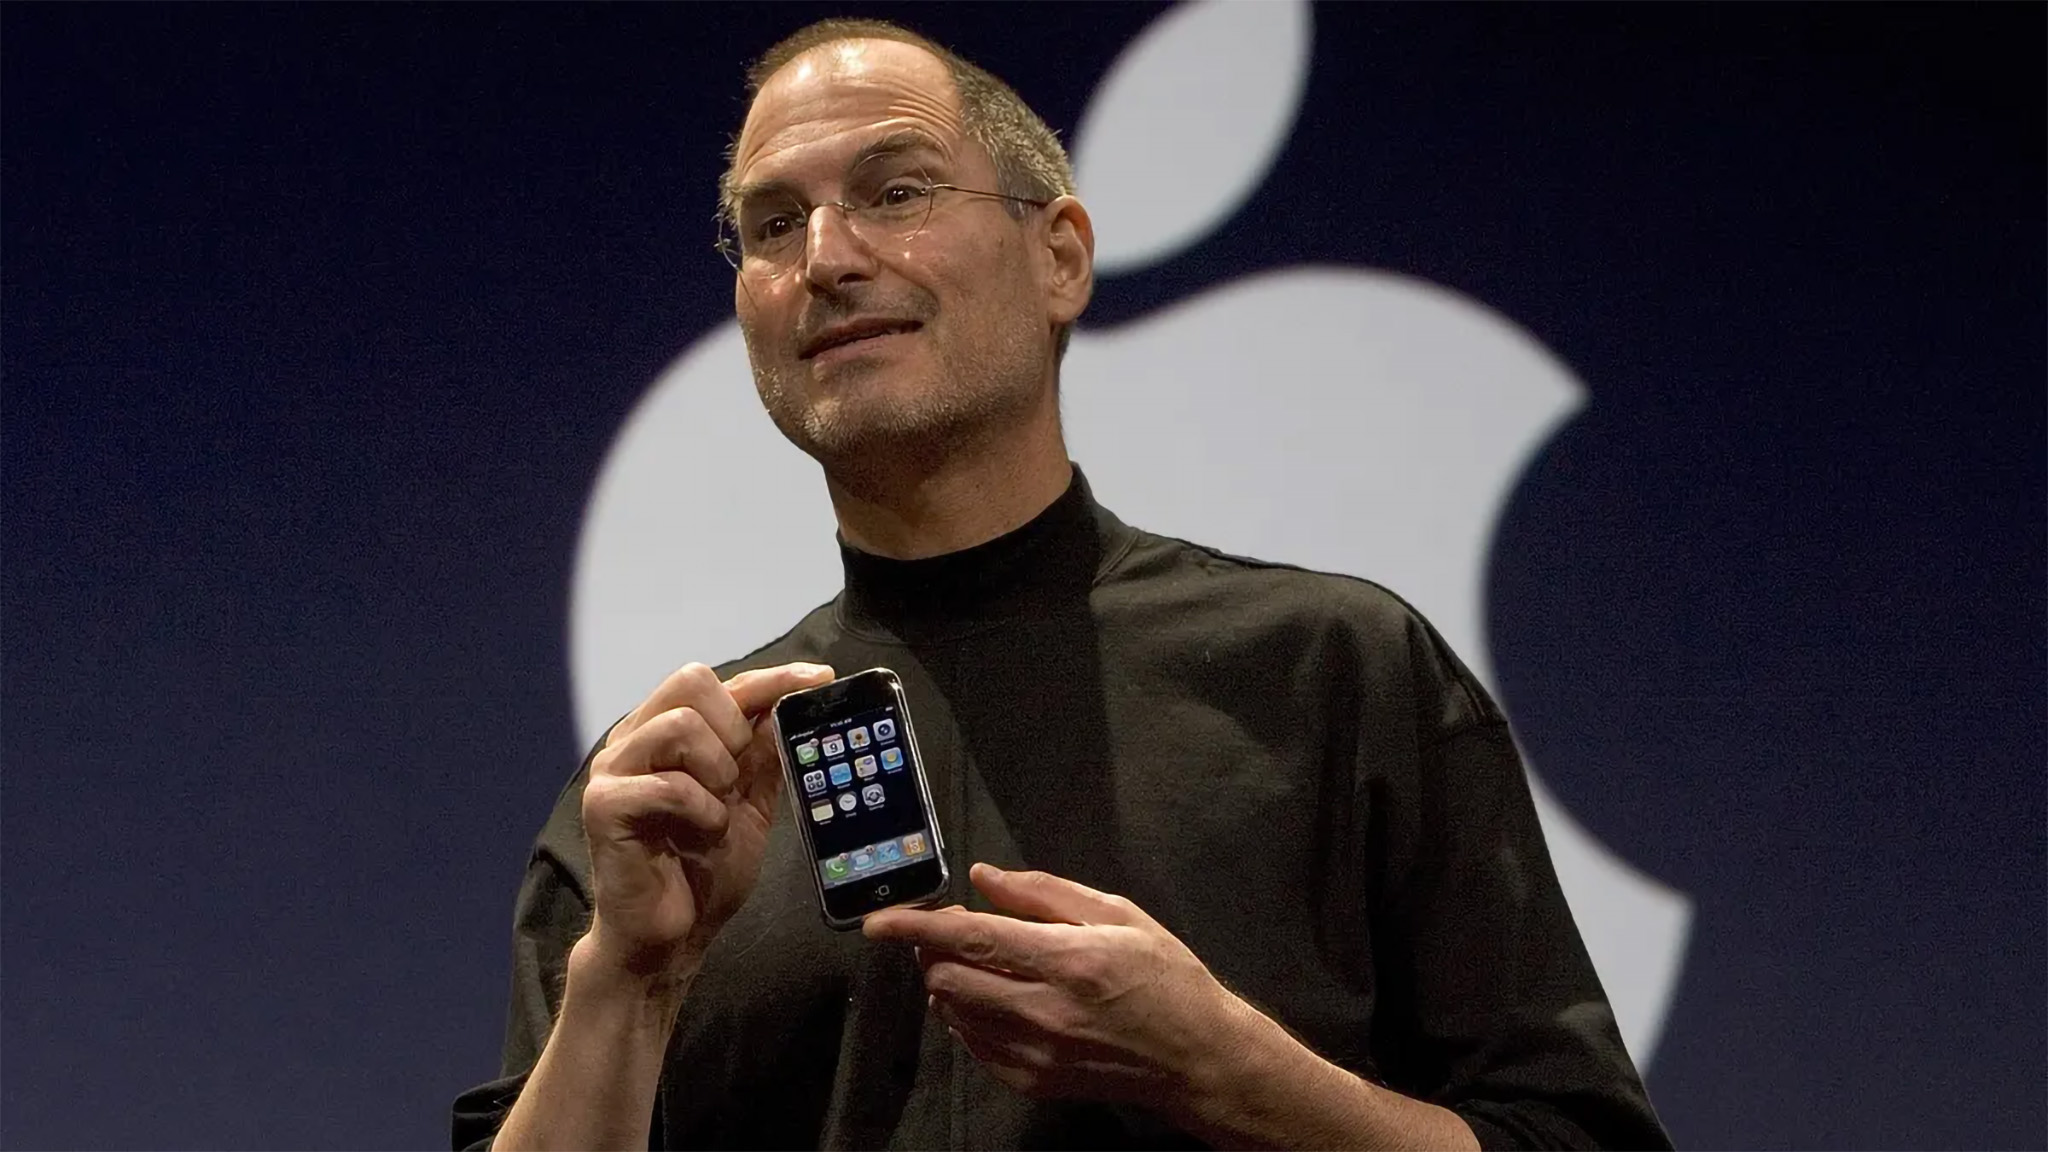 Steve Jobs holding the original iPhone at the announcement even in 2007